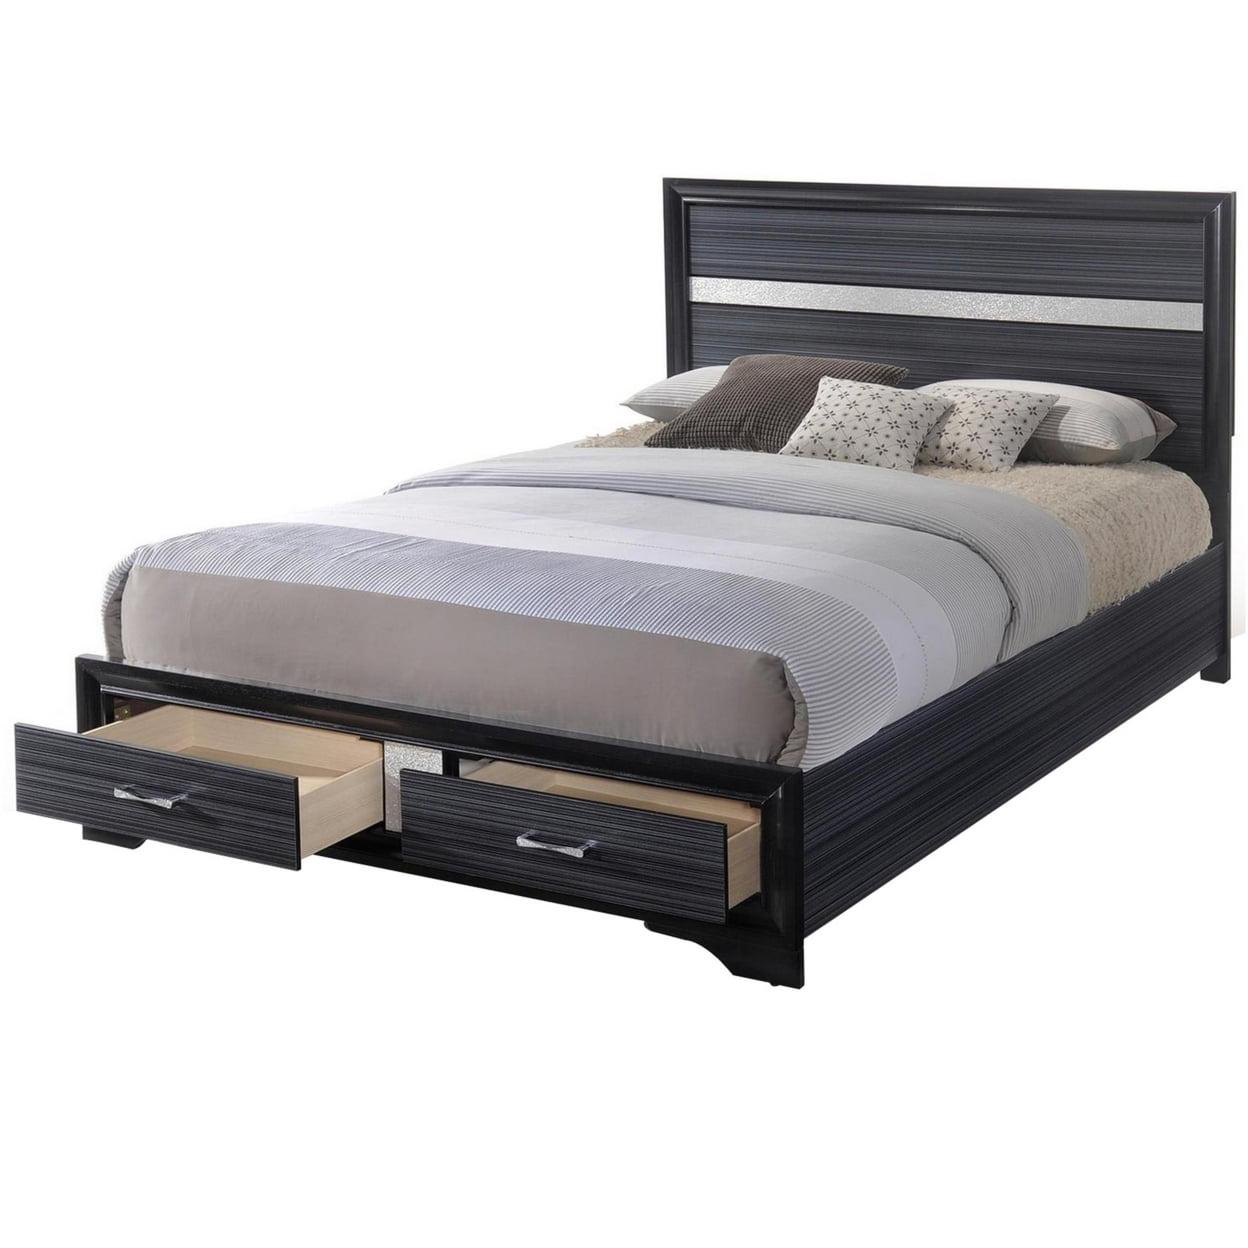 Elegant Eastern King Bed with Acrylic Trim and Storage Drawers, Black